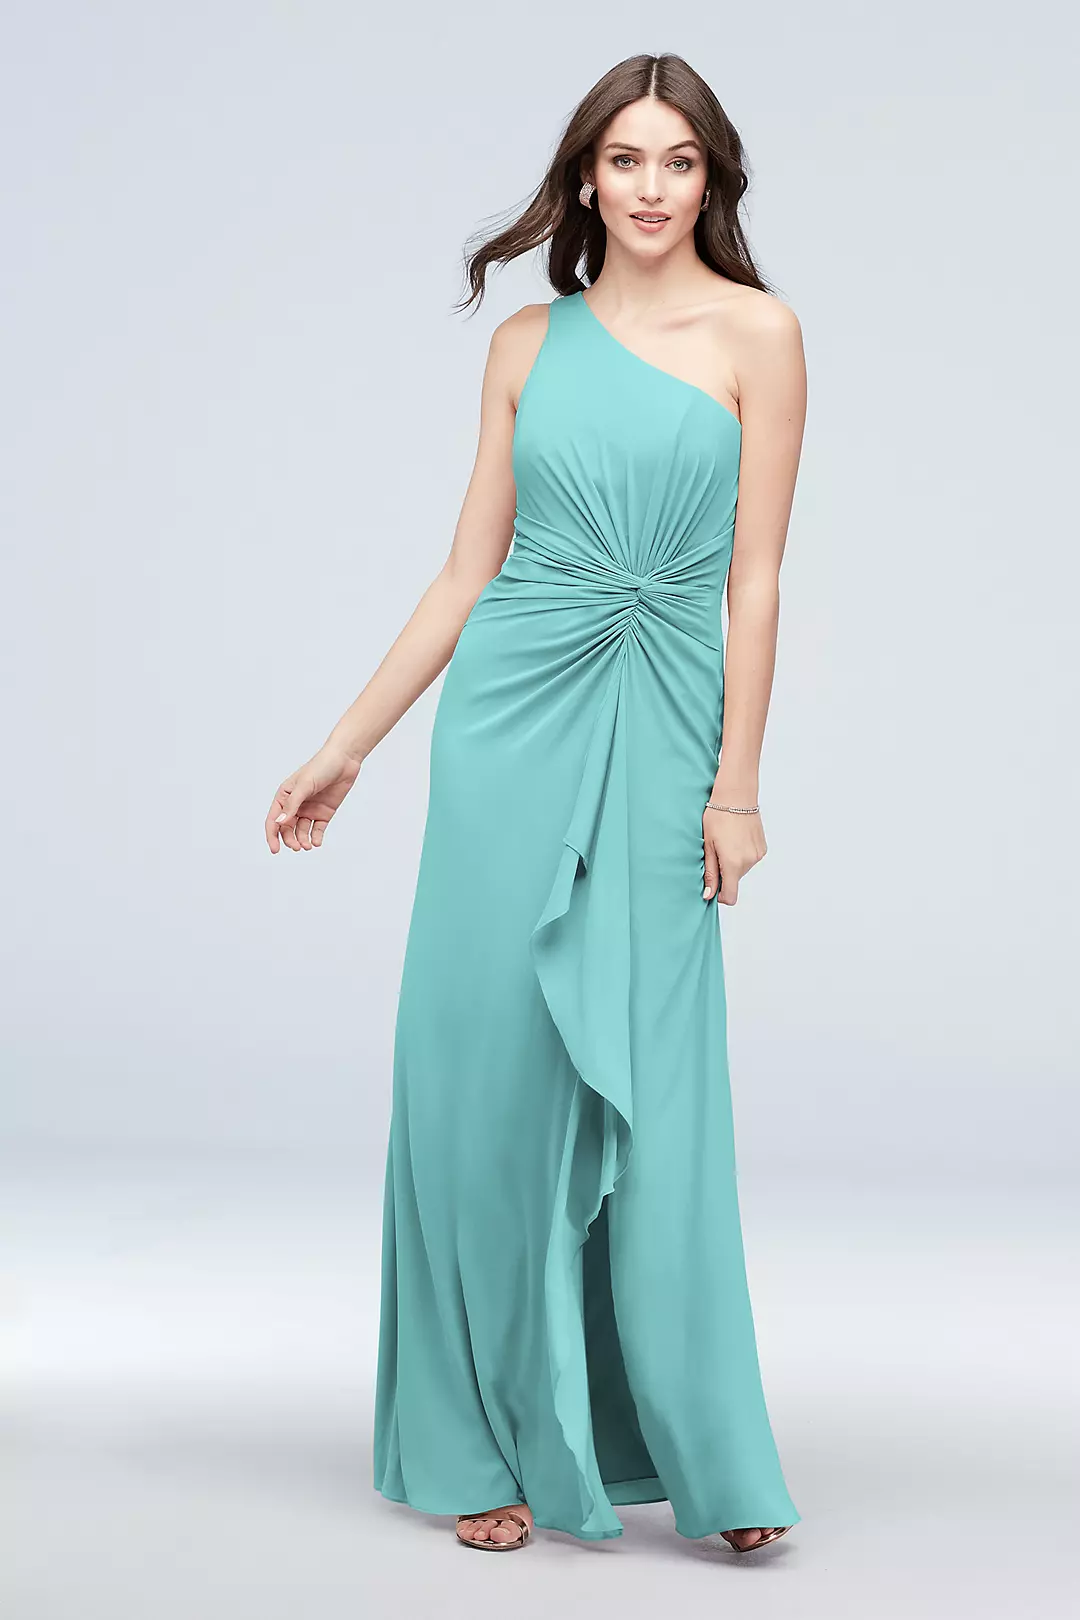 Twisted Knot Cascade One Shoulder Bridesmaid Dress Image